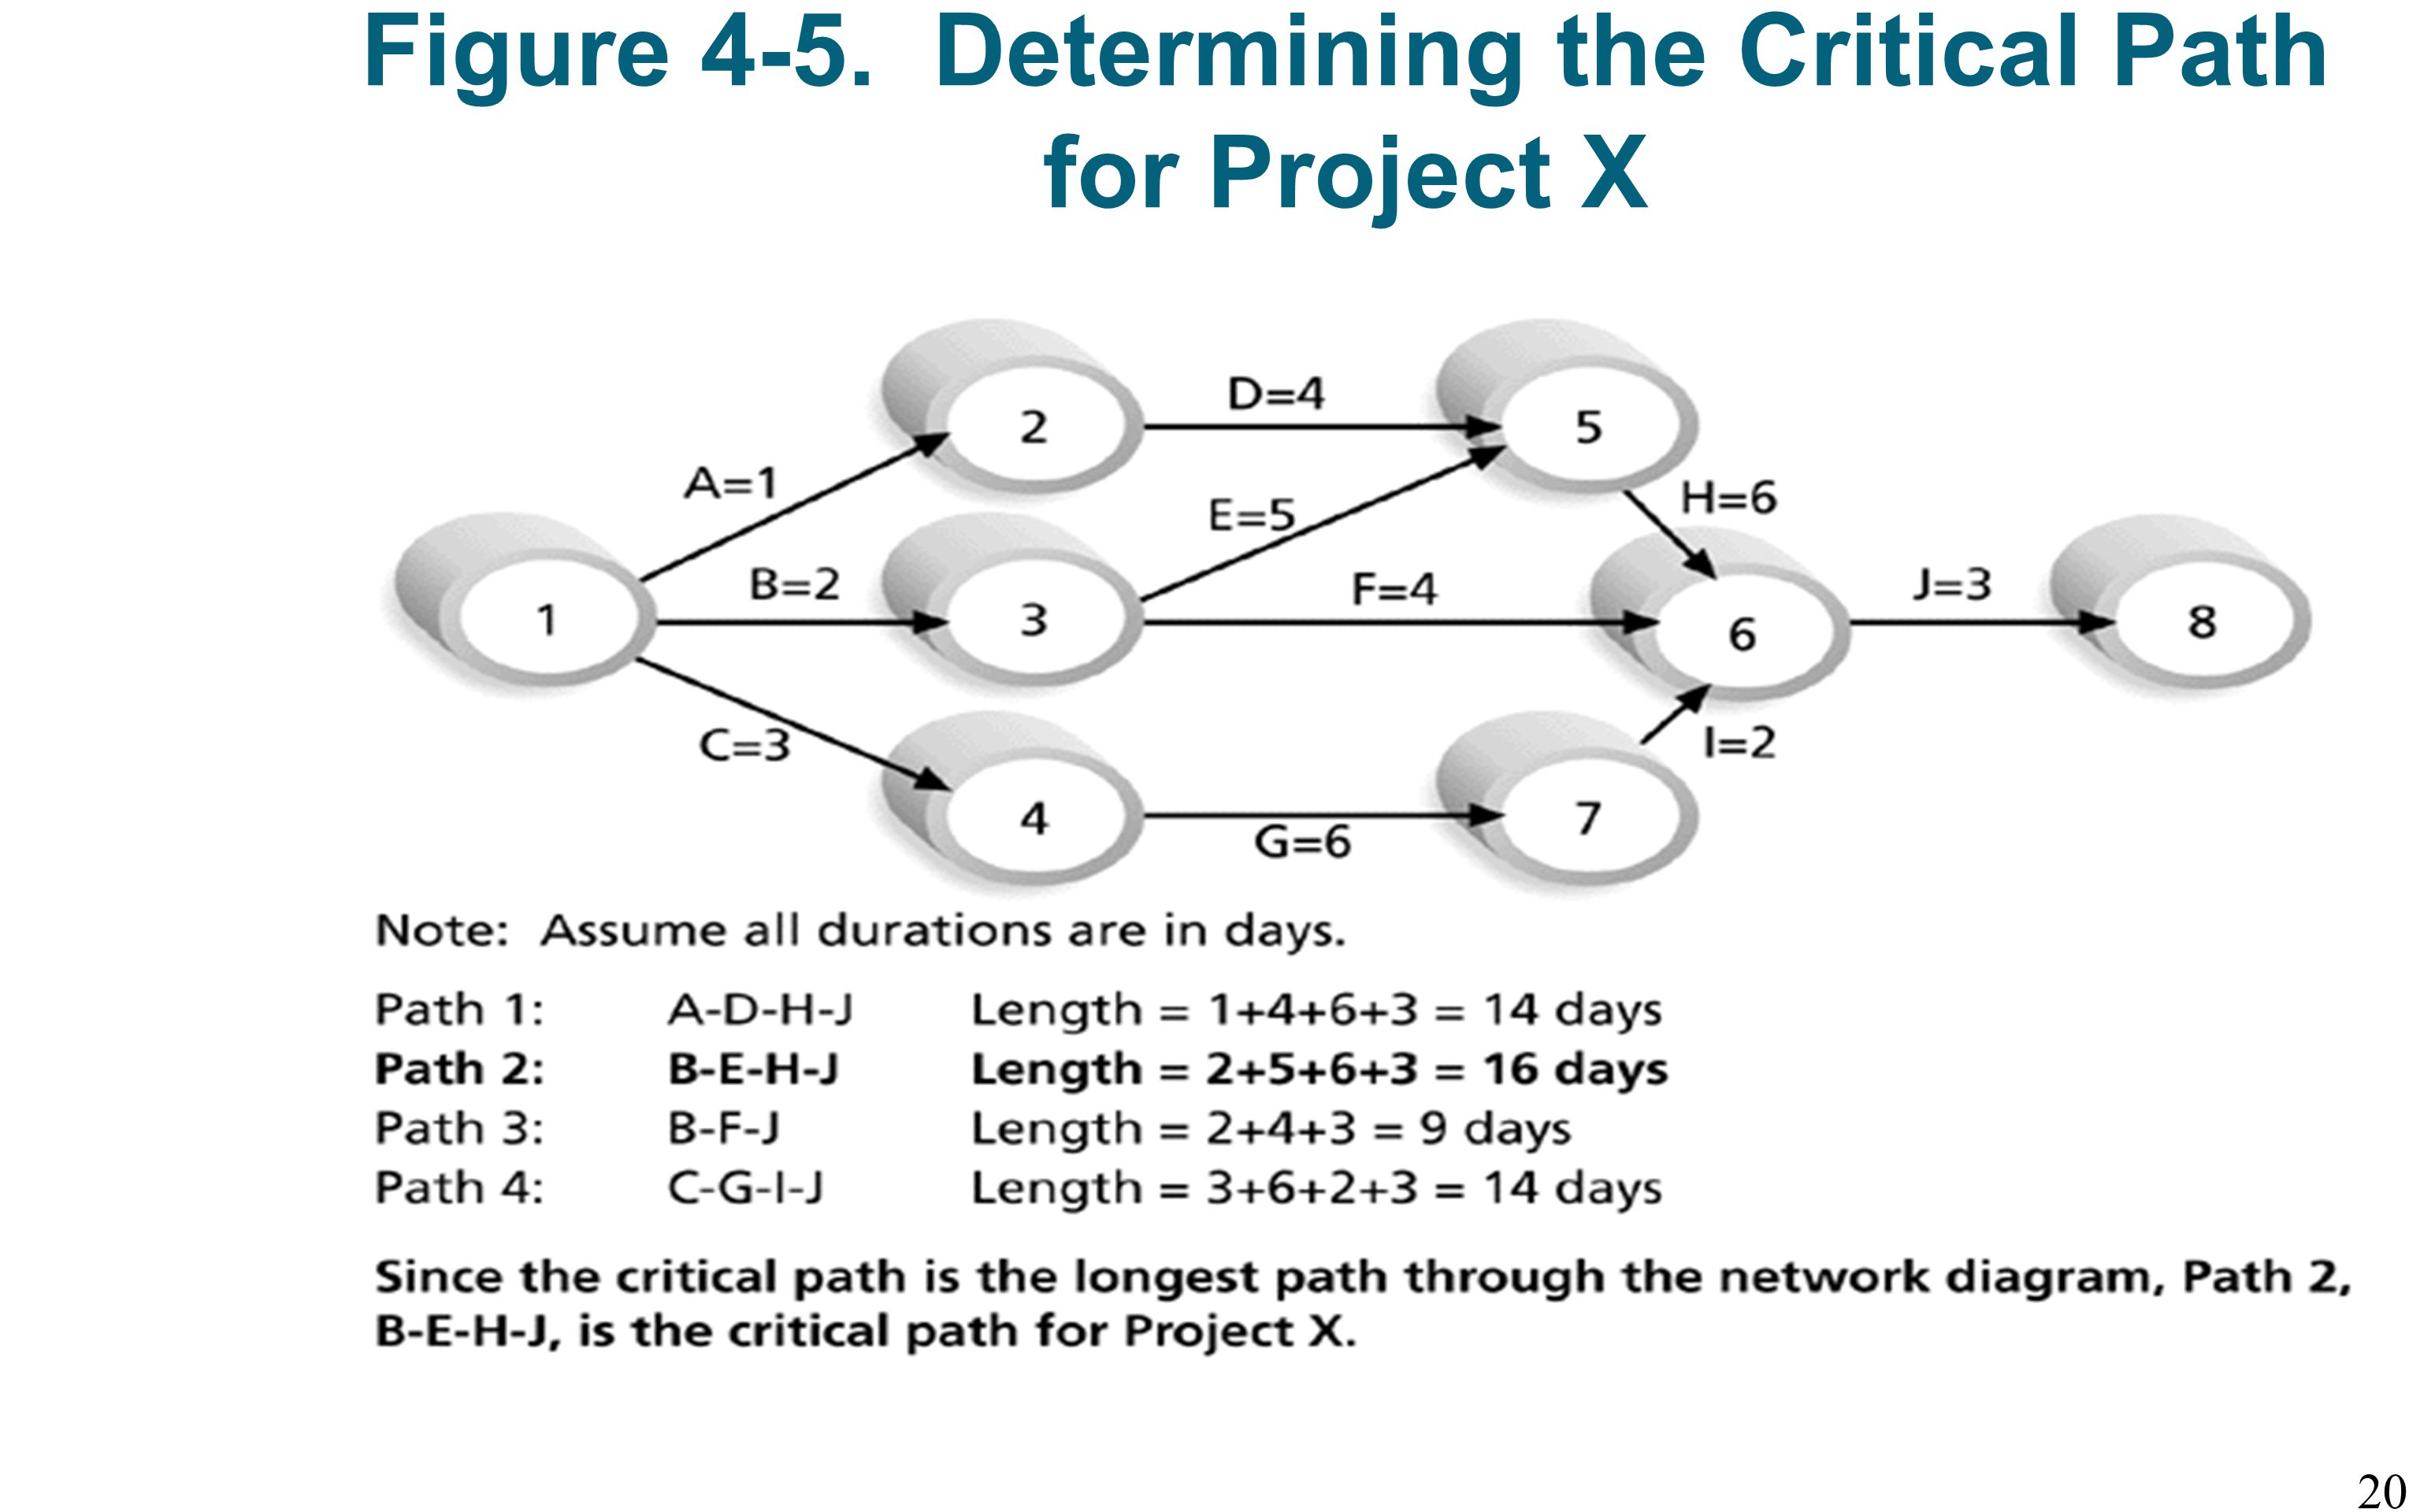 Figure 4-5. Determining the Critical Path for Project X